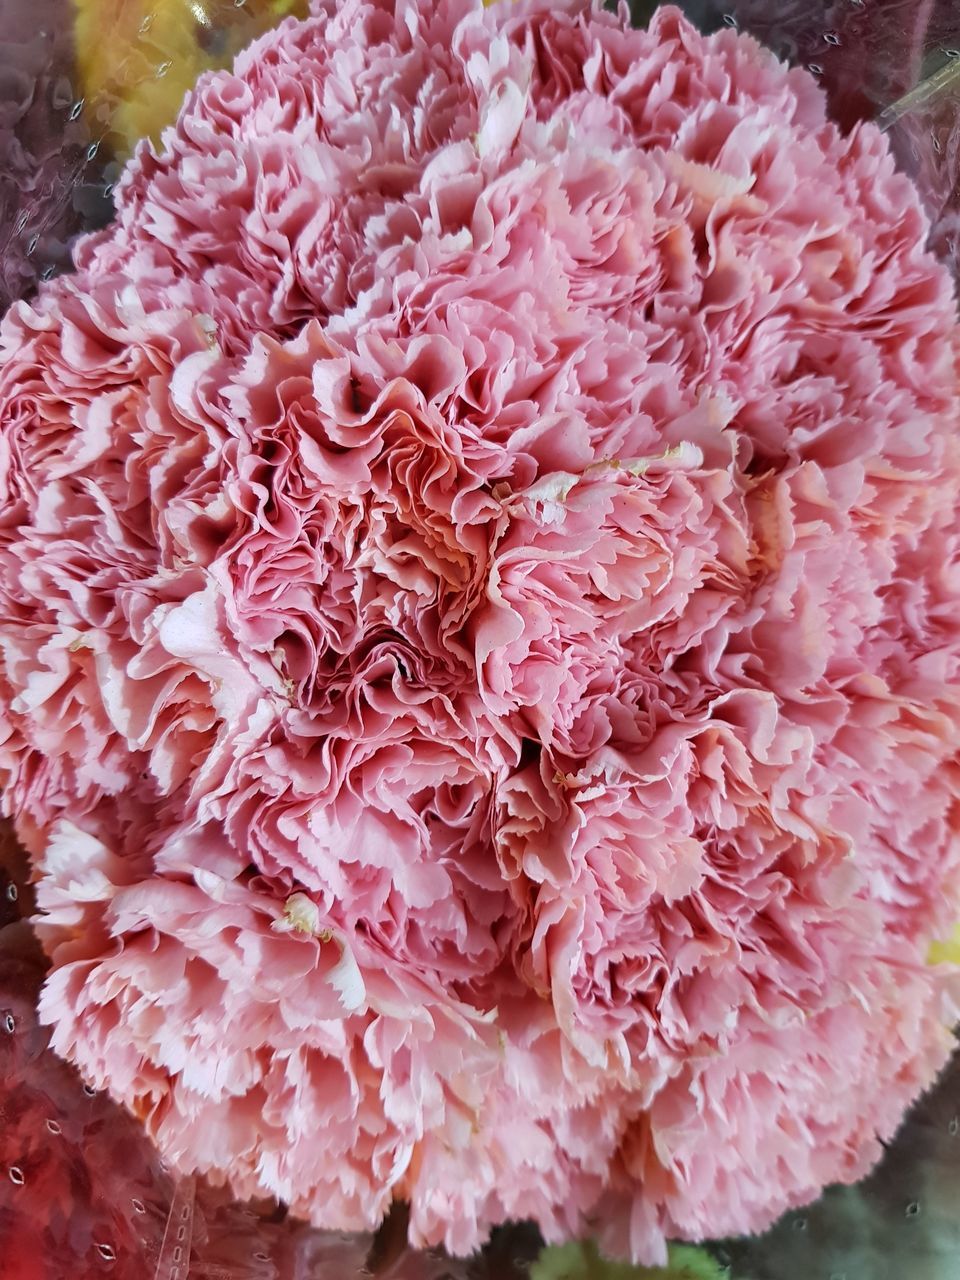 HIGH ANGLE VIEW OF PINK ROSES